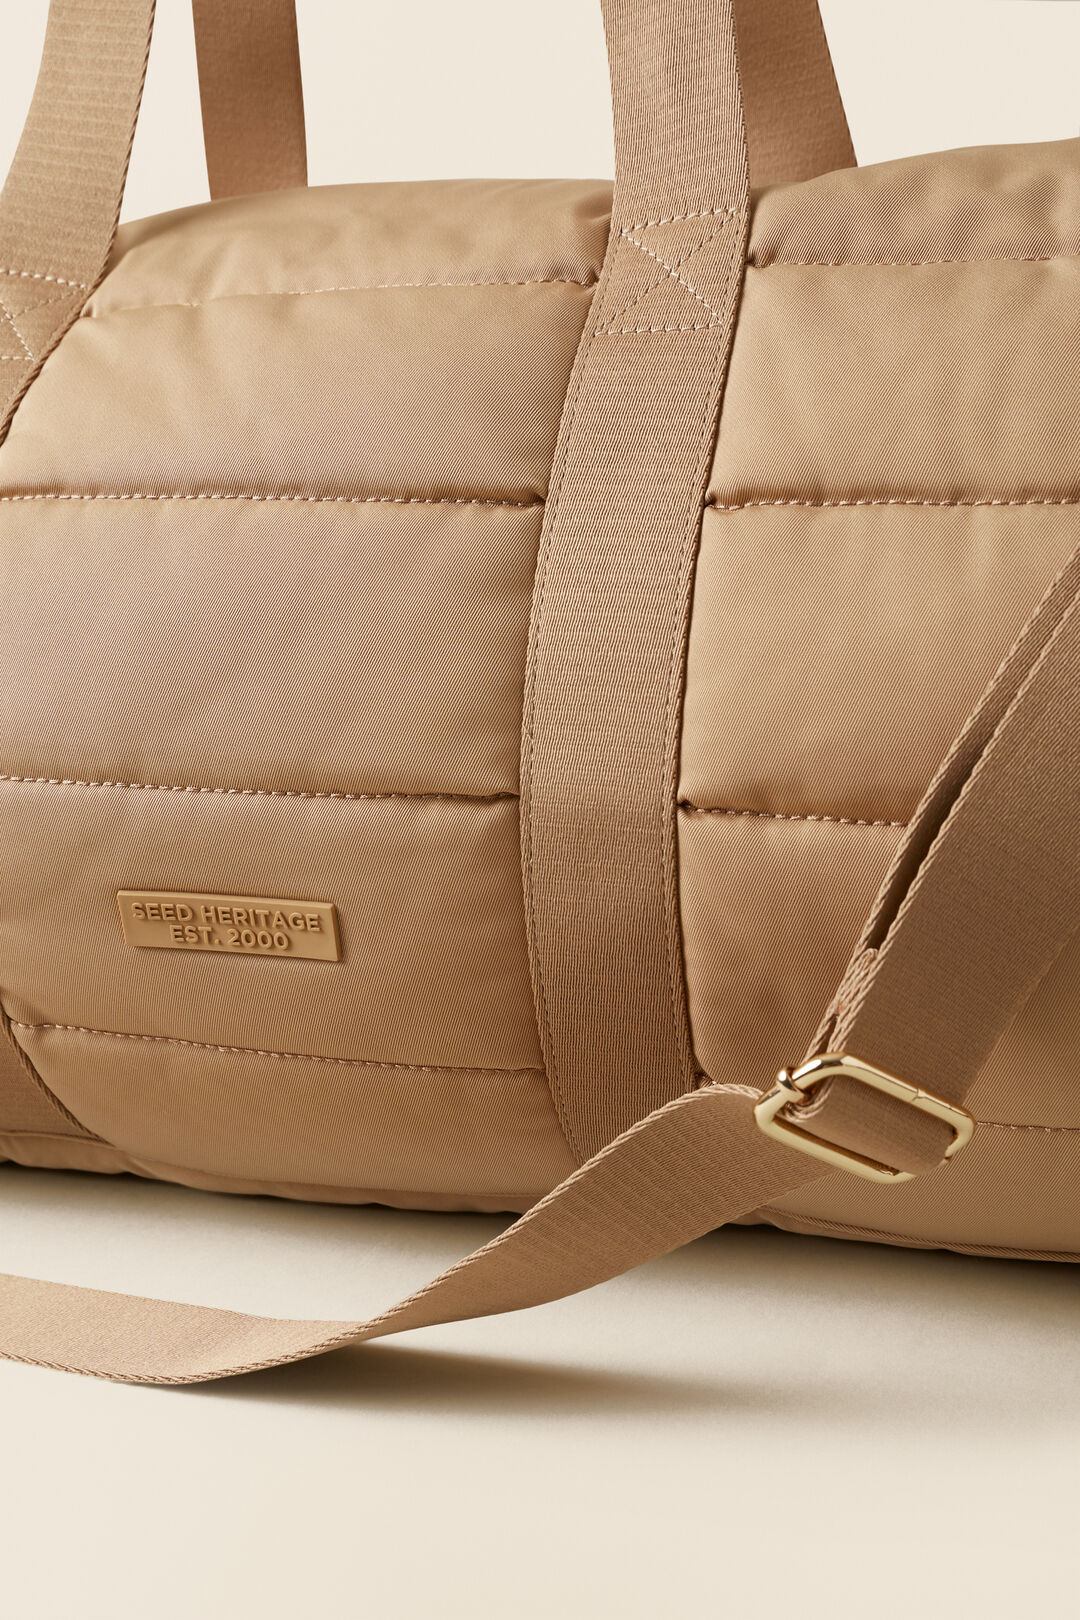 Quilted Leisure Duffle Bag   Champagne Beige  hi-res